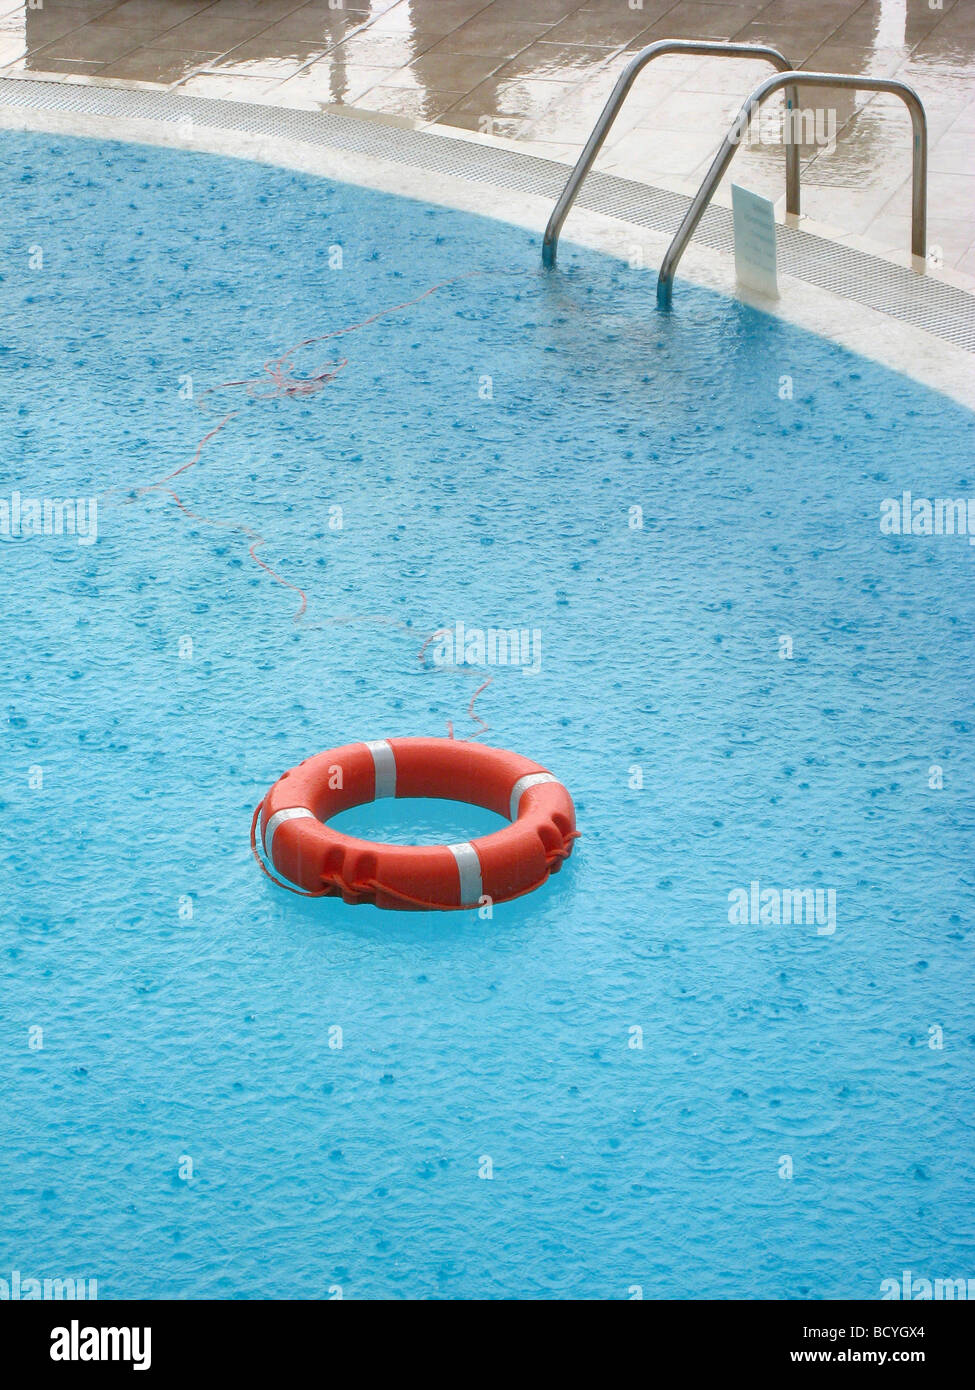 Life ring in a hotel swimming pool Stock Photo